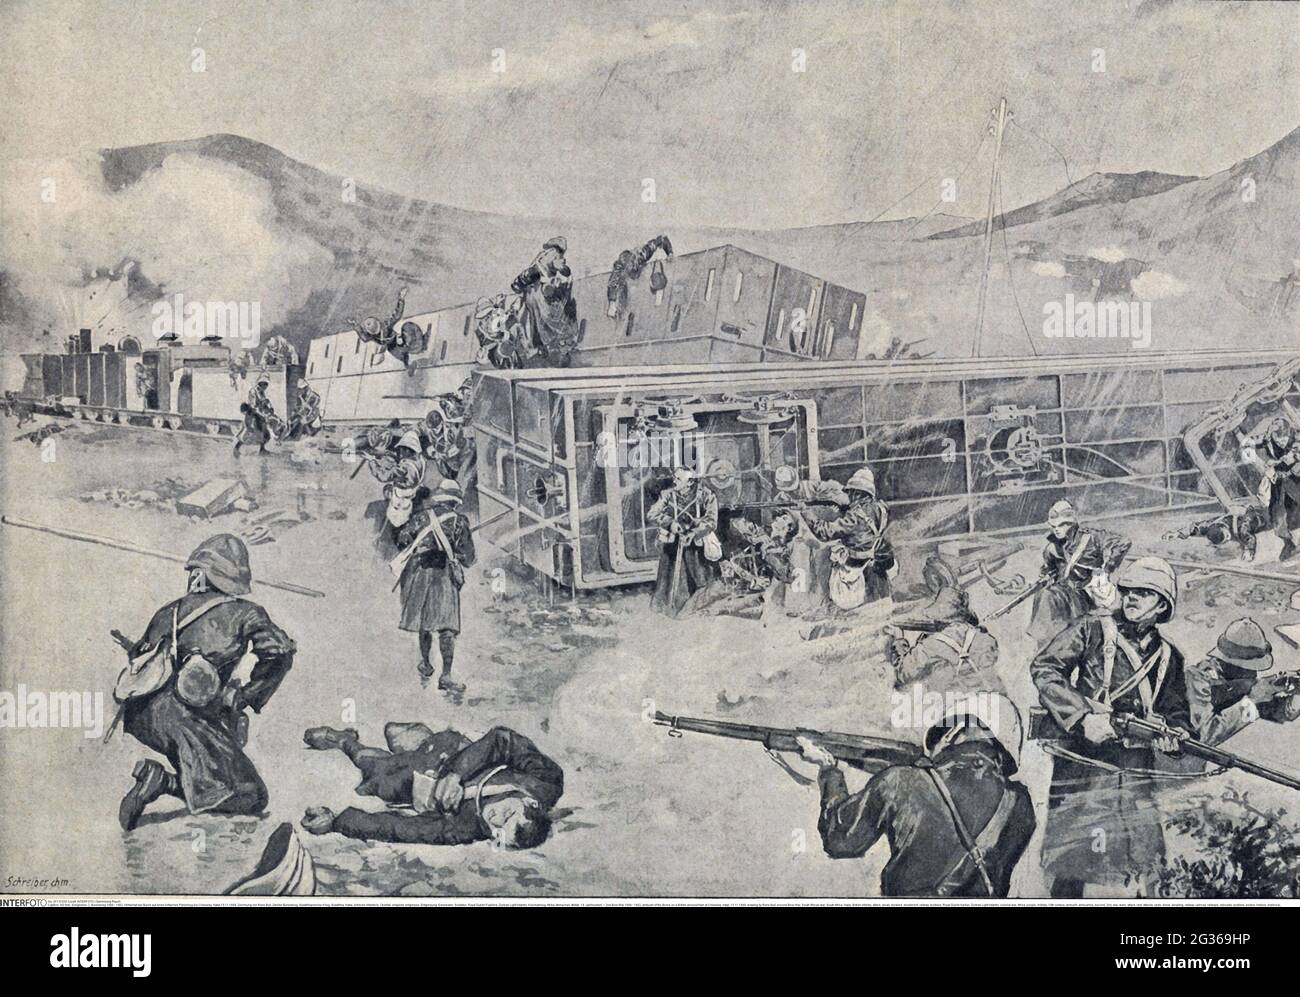 2nd Boer War 1899 - 1902, ambush of the Boers on a British amored train at Chieveley, natal, ADDITIONAL-RIGHTS-CLEARANCE-INFO-NOT-AVAILABLE Stock Photo